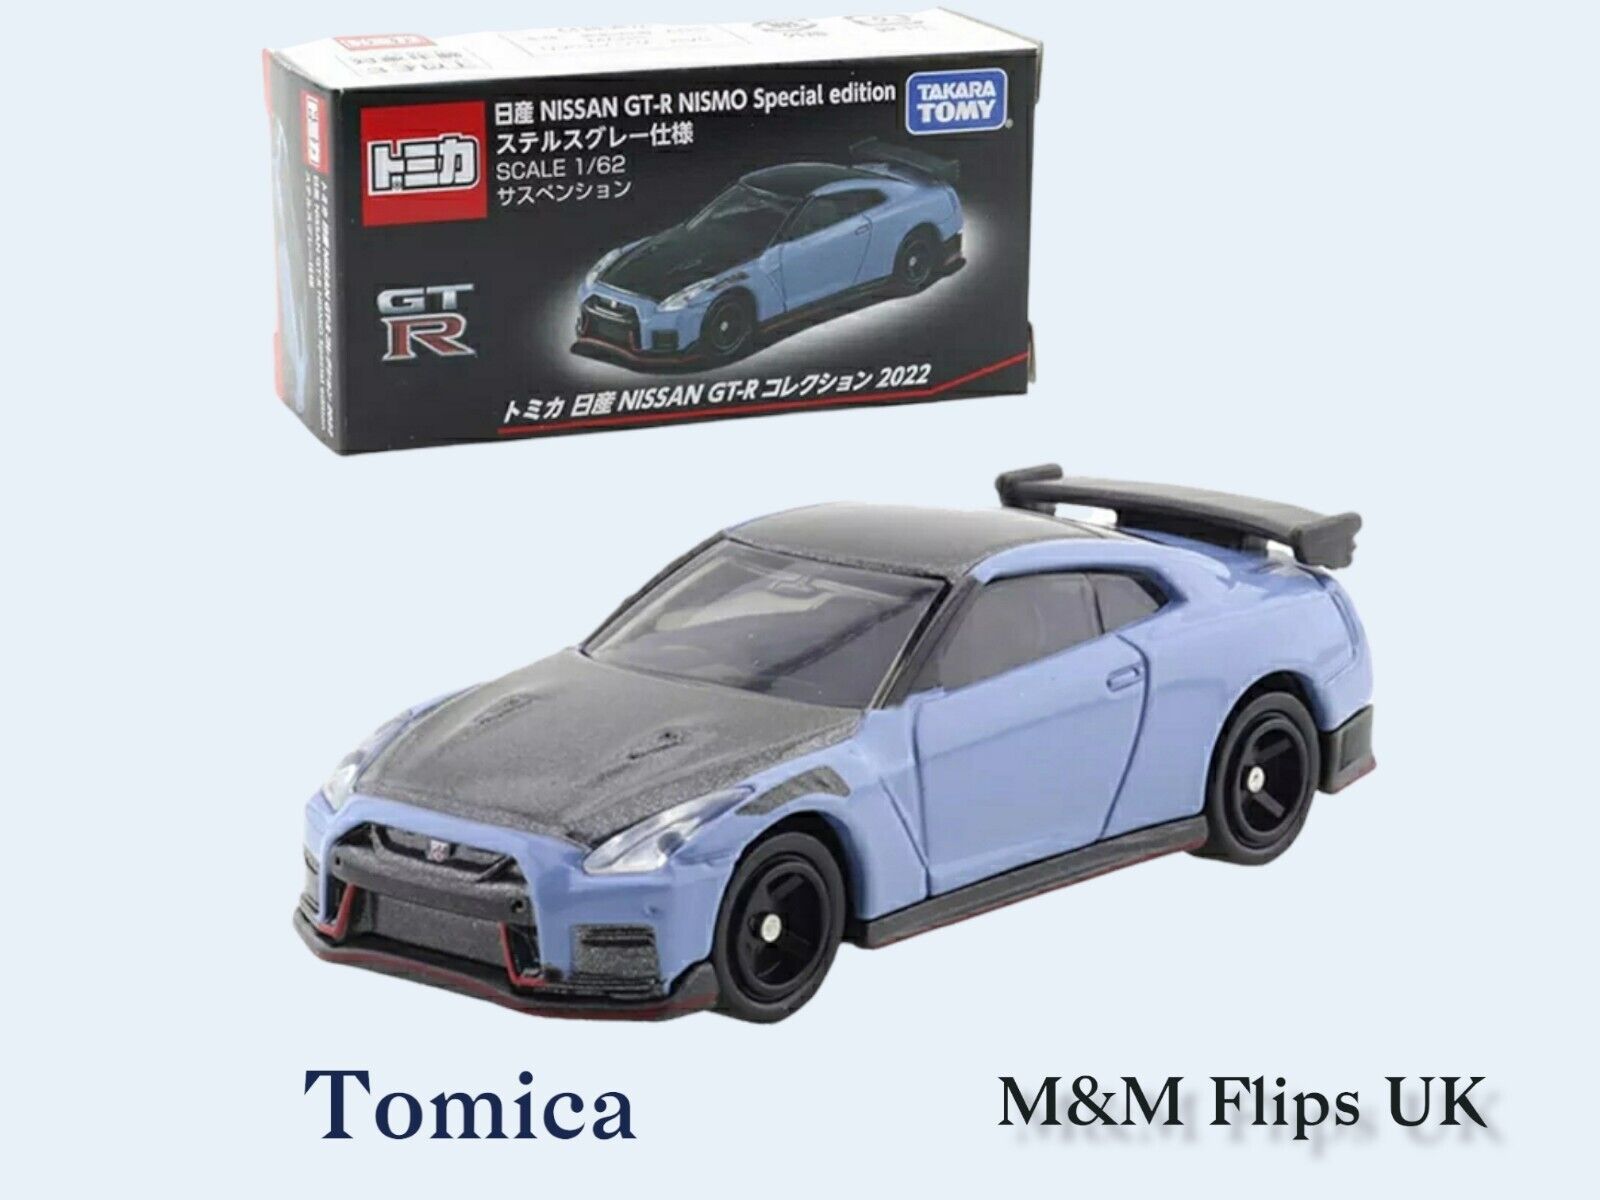 Tomica NISSAN GT-R Collection 2022 Nissan NISSAN GT-R NISMO Special Ed. Stealth